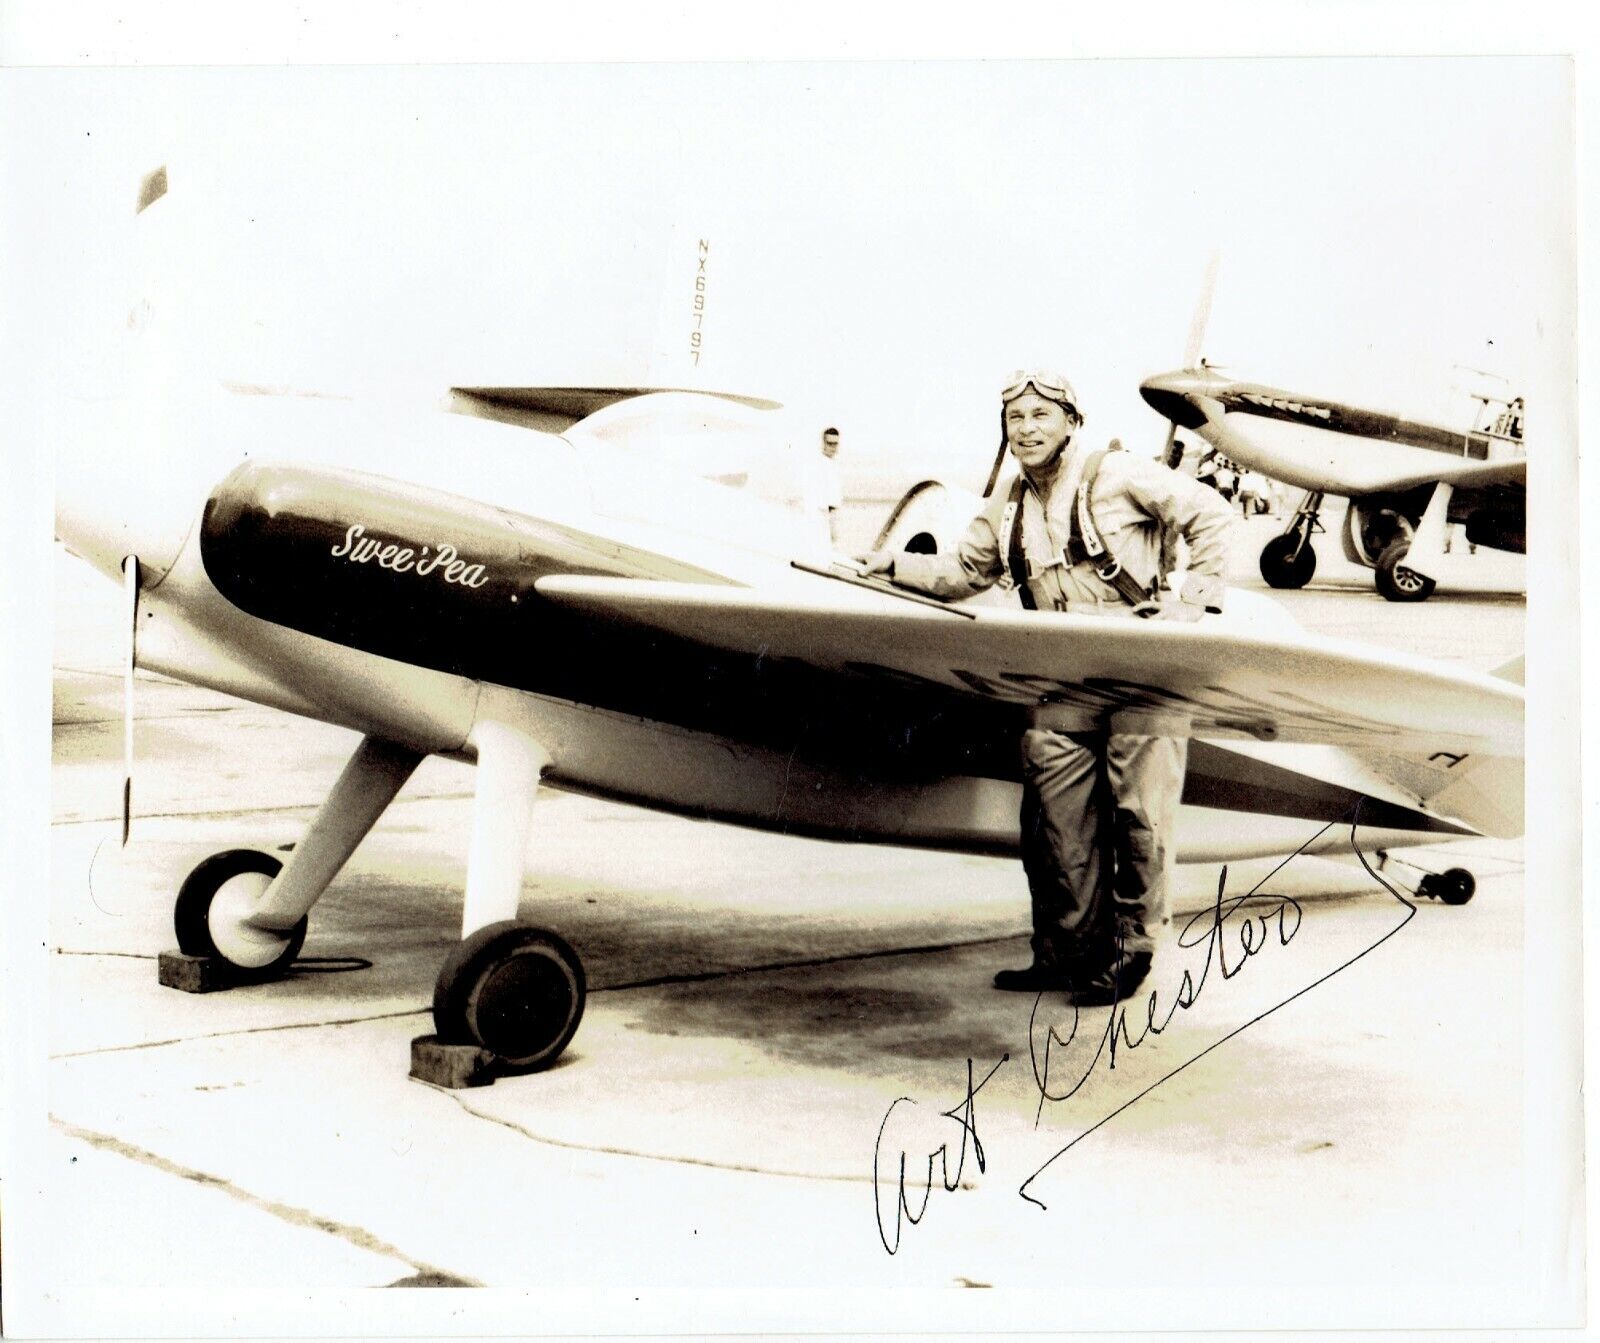 AVIATOR ART CHESTER SIGNED PHOTO WITH SWEE\' PEA CIRCA 1947- KILLED IN CRASH 1949